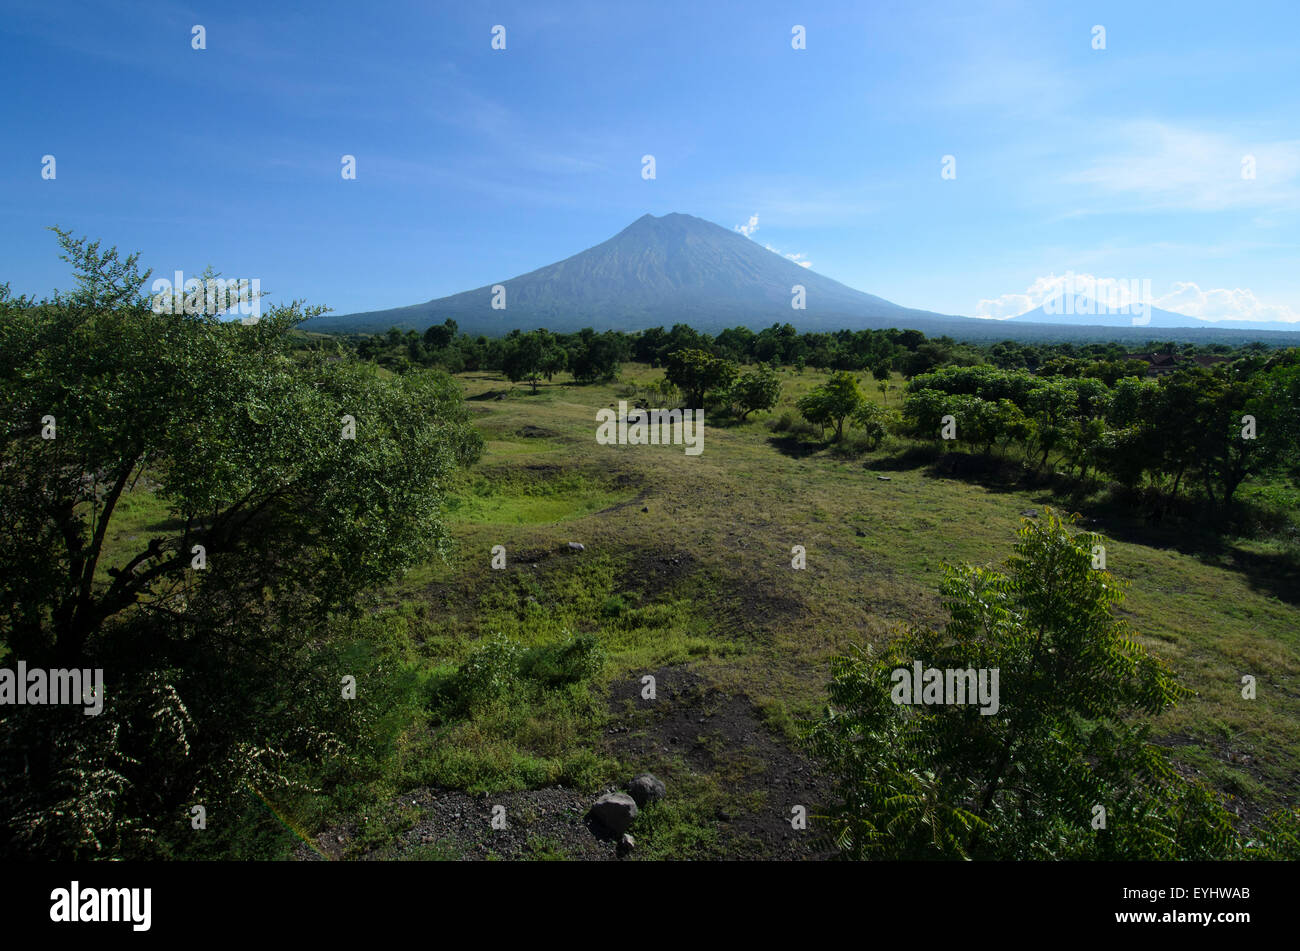 Scenic landscape of NE Bali with Mt Agung volcano in the foreground and Mt Batur volcano in the background, Tulamben, Bali Stock Photo